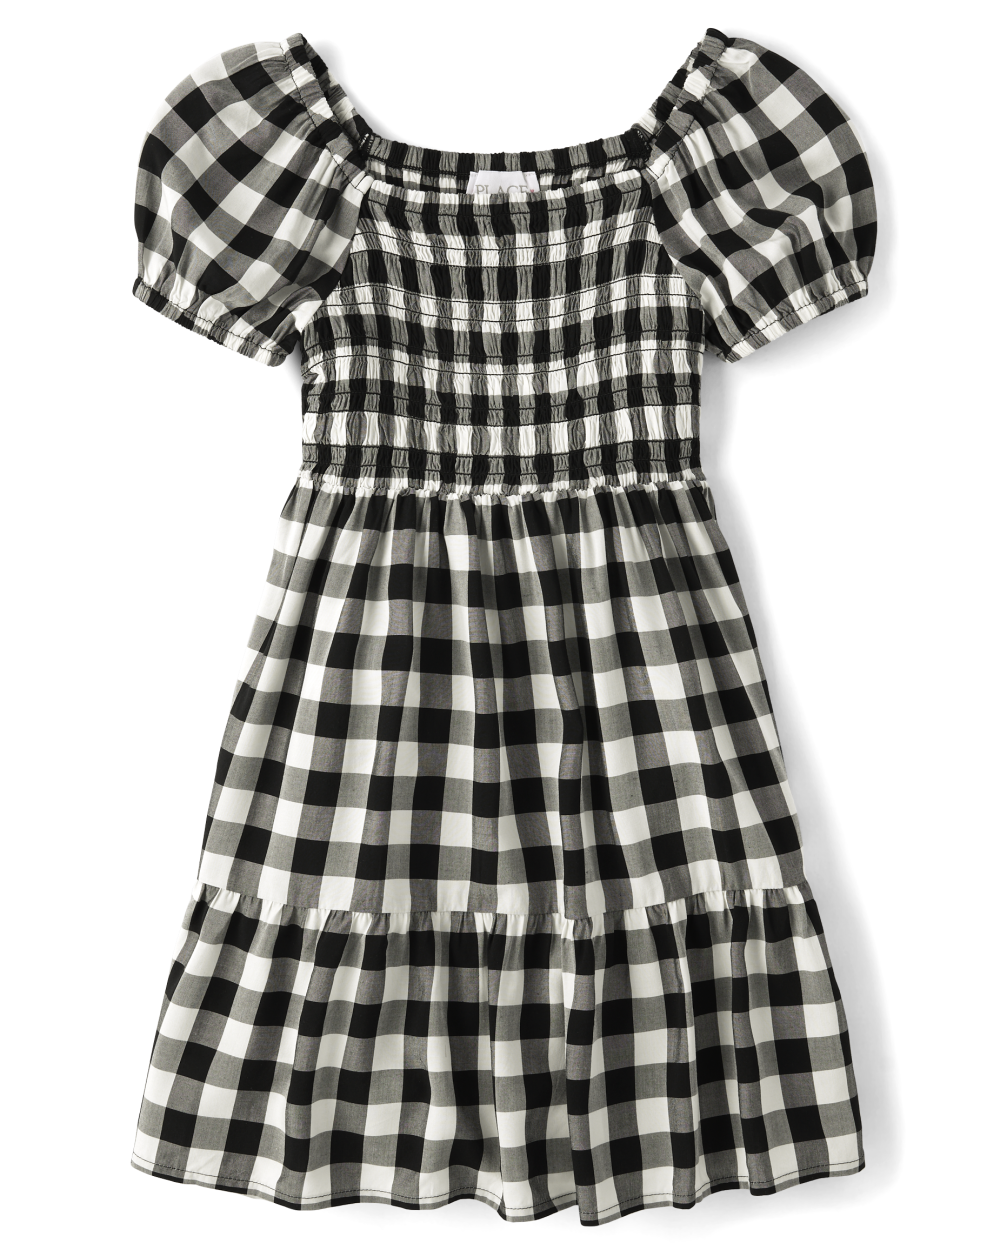 Girls Above the Knee Rayon Smocked Square Neck Puff Sleeves Short Sleeves Sleeves Checkered Gingham Print Dress With Ruffles